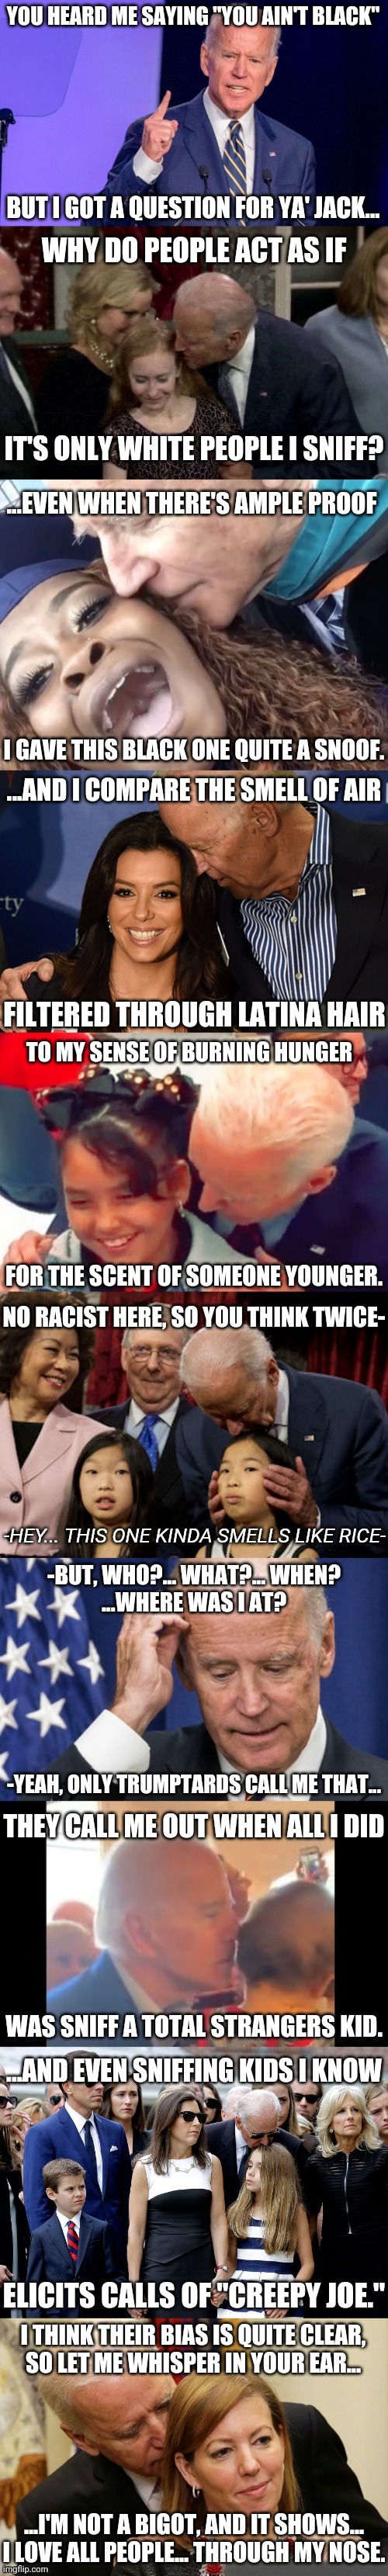 The Ballad of Creepy Joe | YOU HEARD ME SAYING "YOU AIN'T BLACK"; BUT I GOT A QUESTION FOR YA' JACK... WHY DO PEOPLE ACT AS IF; IT'S ONLY WHITE PEOPLE I SNIFF? ...EVEN WHEN THERE'S AMPLE PROOF; I GAVE THIS BLACK ONE QUITE A SNOOF. ...AND I COMPARE THE SMELL OF AIR; FILTERED THROUGH LATINA HAIR; TO MY SENSE OF BURNING HUNGER; FOR THE SCENT OF SOMEONE YOUNGER. NO RACIST HERE, SO YOU THINK TWICE-; -HEY... THIS ONE KINDA SMELLS LIKE RICE-; -BUT, WHO?... WHAT?... WHEN?
...WHERE WAS I AT? -YEAH, ONLY TRUMPTARDS CALL ME THAT... THEY CALL ME OUT WHEN ALL I DID; WAS SNIFF A TOTAL STRANGERS KID. ...AND EVEN SNIFFING KIDS I KNOW; ELICITS CALLS OF "CREEPY JOE."; I THINK THEIR BIAS IS QUITE CLEAR,
SO LET ME WHISPER IN YOUR EAR... ...I'M NOT A BIGOT, AND IT SHOWS...
I LOVE ALL PEOPLE... THROUGH MY NOSE. | image tagged in creepy joe biden,sniff,poetry | made w/ Imgflip meme maker